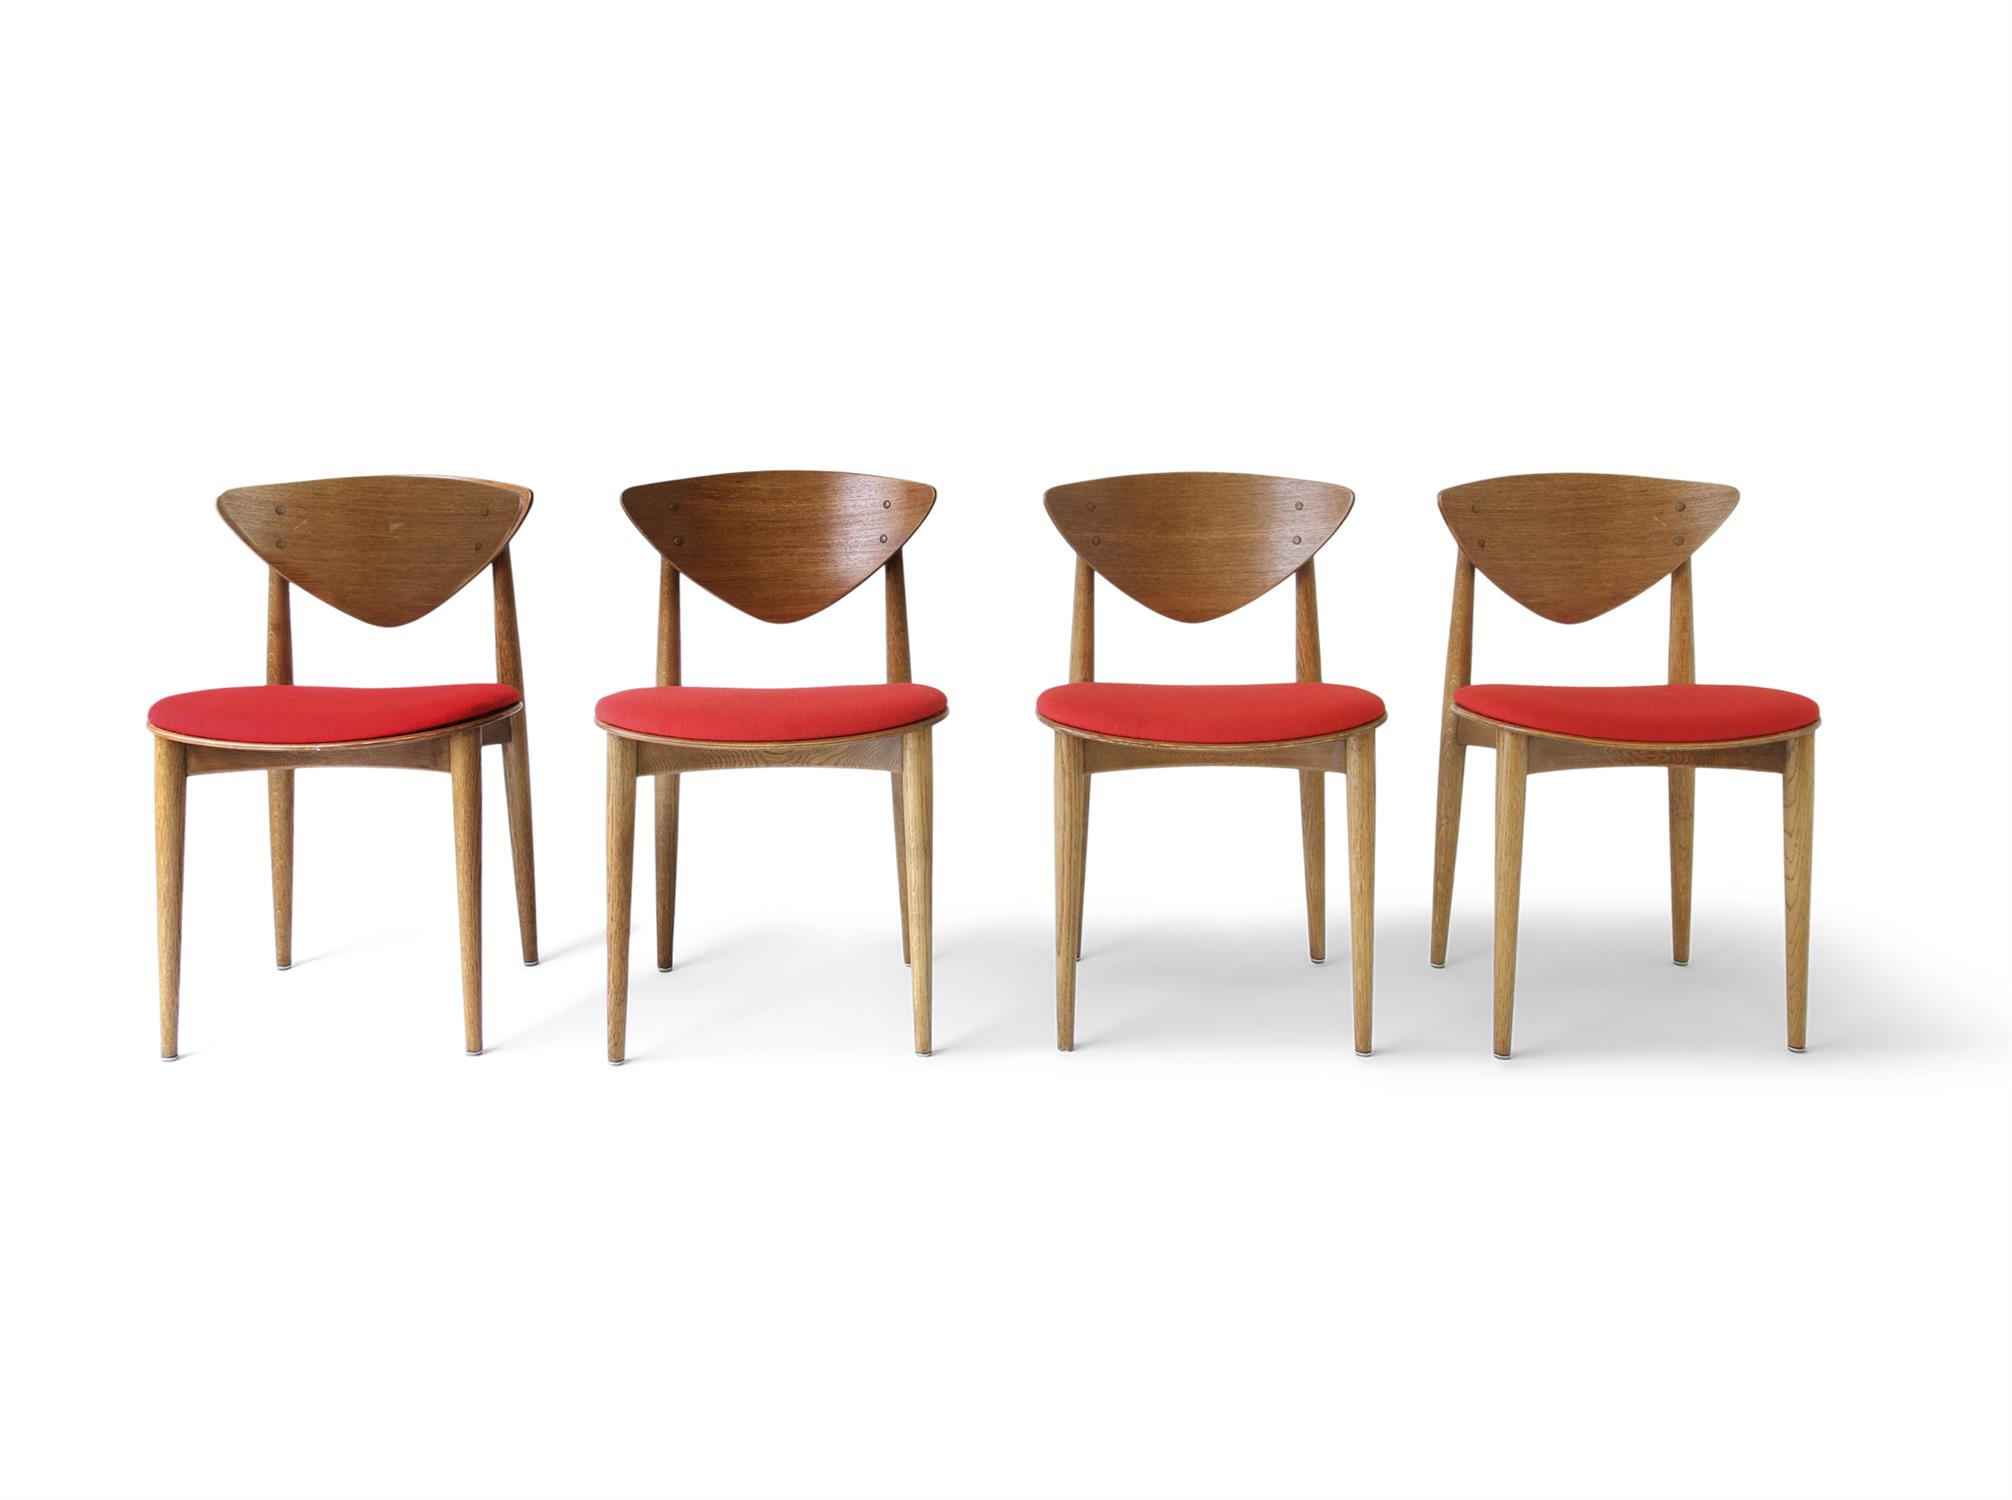 PETER HVIDT AND ORLA MOLGAARD-NIELSEN A set of four dining chairs by Peter Hvidt and Orla - Image 2 of 6